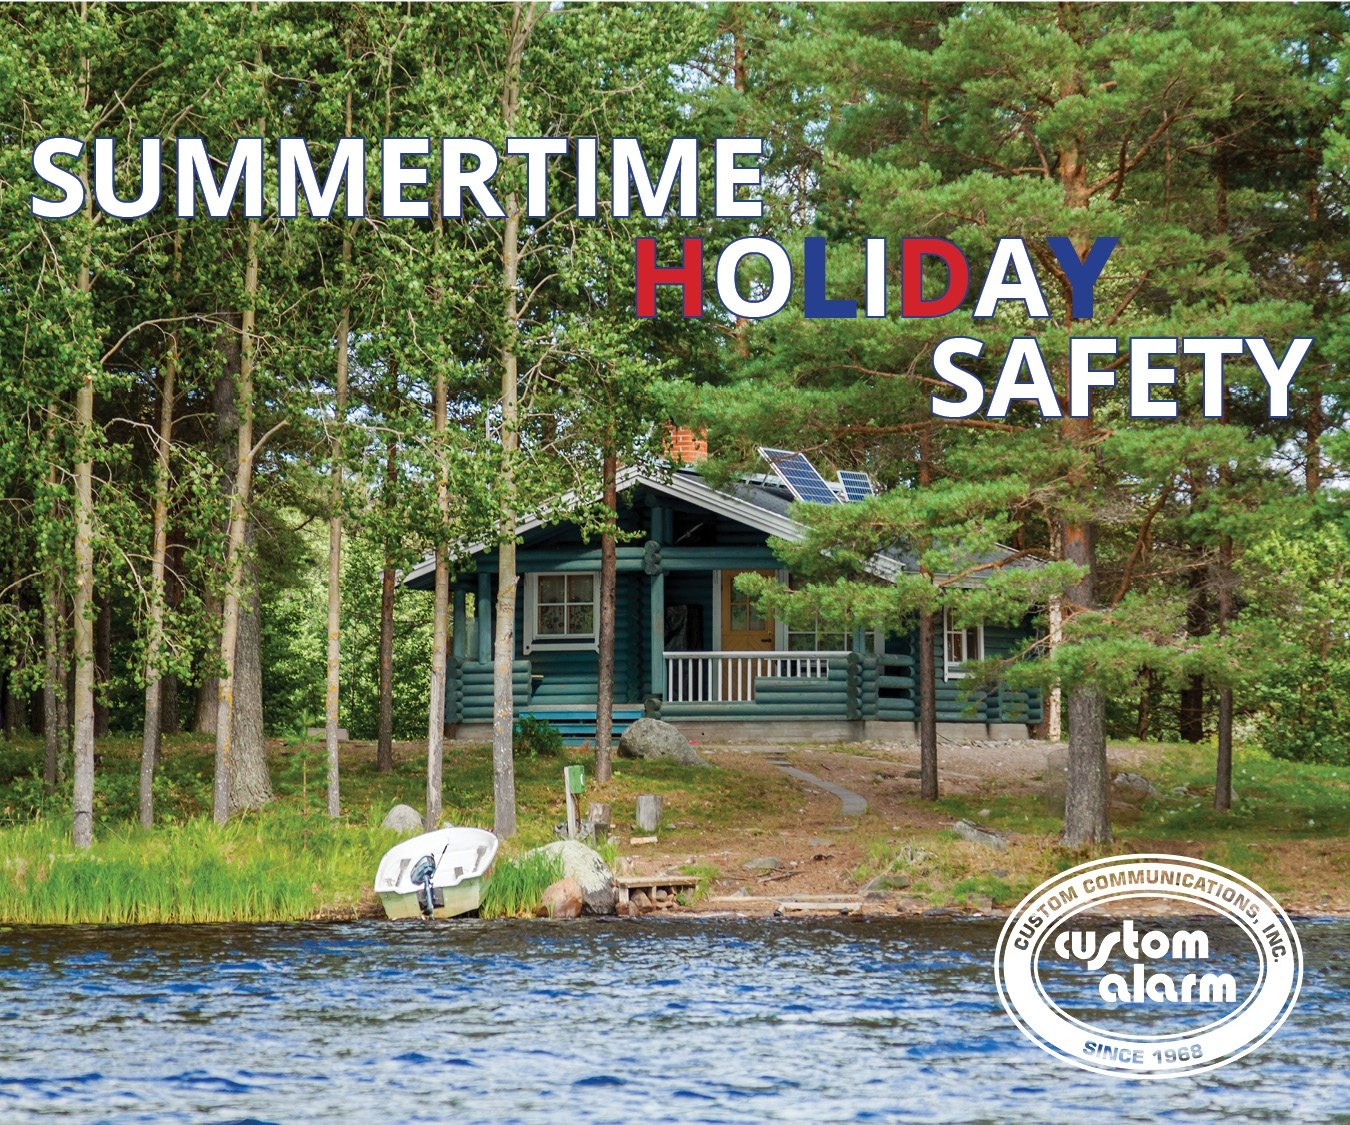 Summertime Holiday Safety